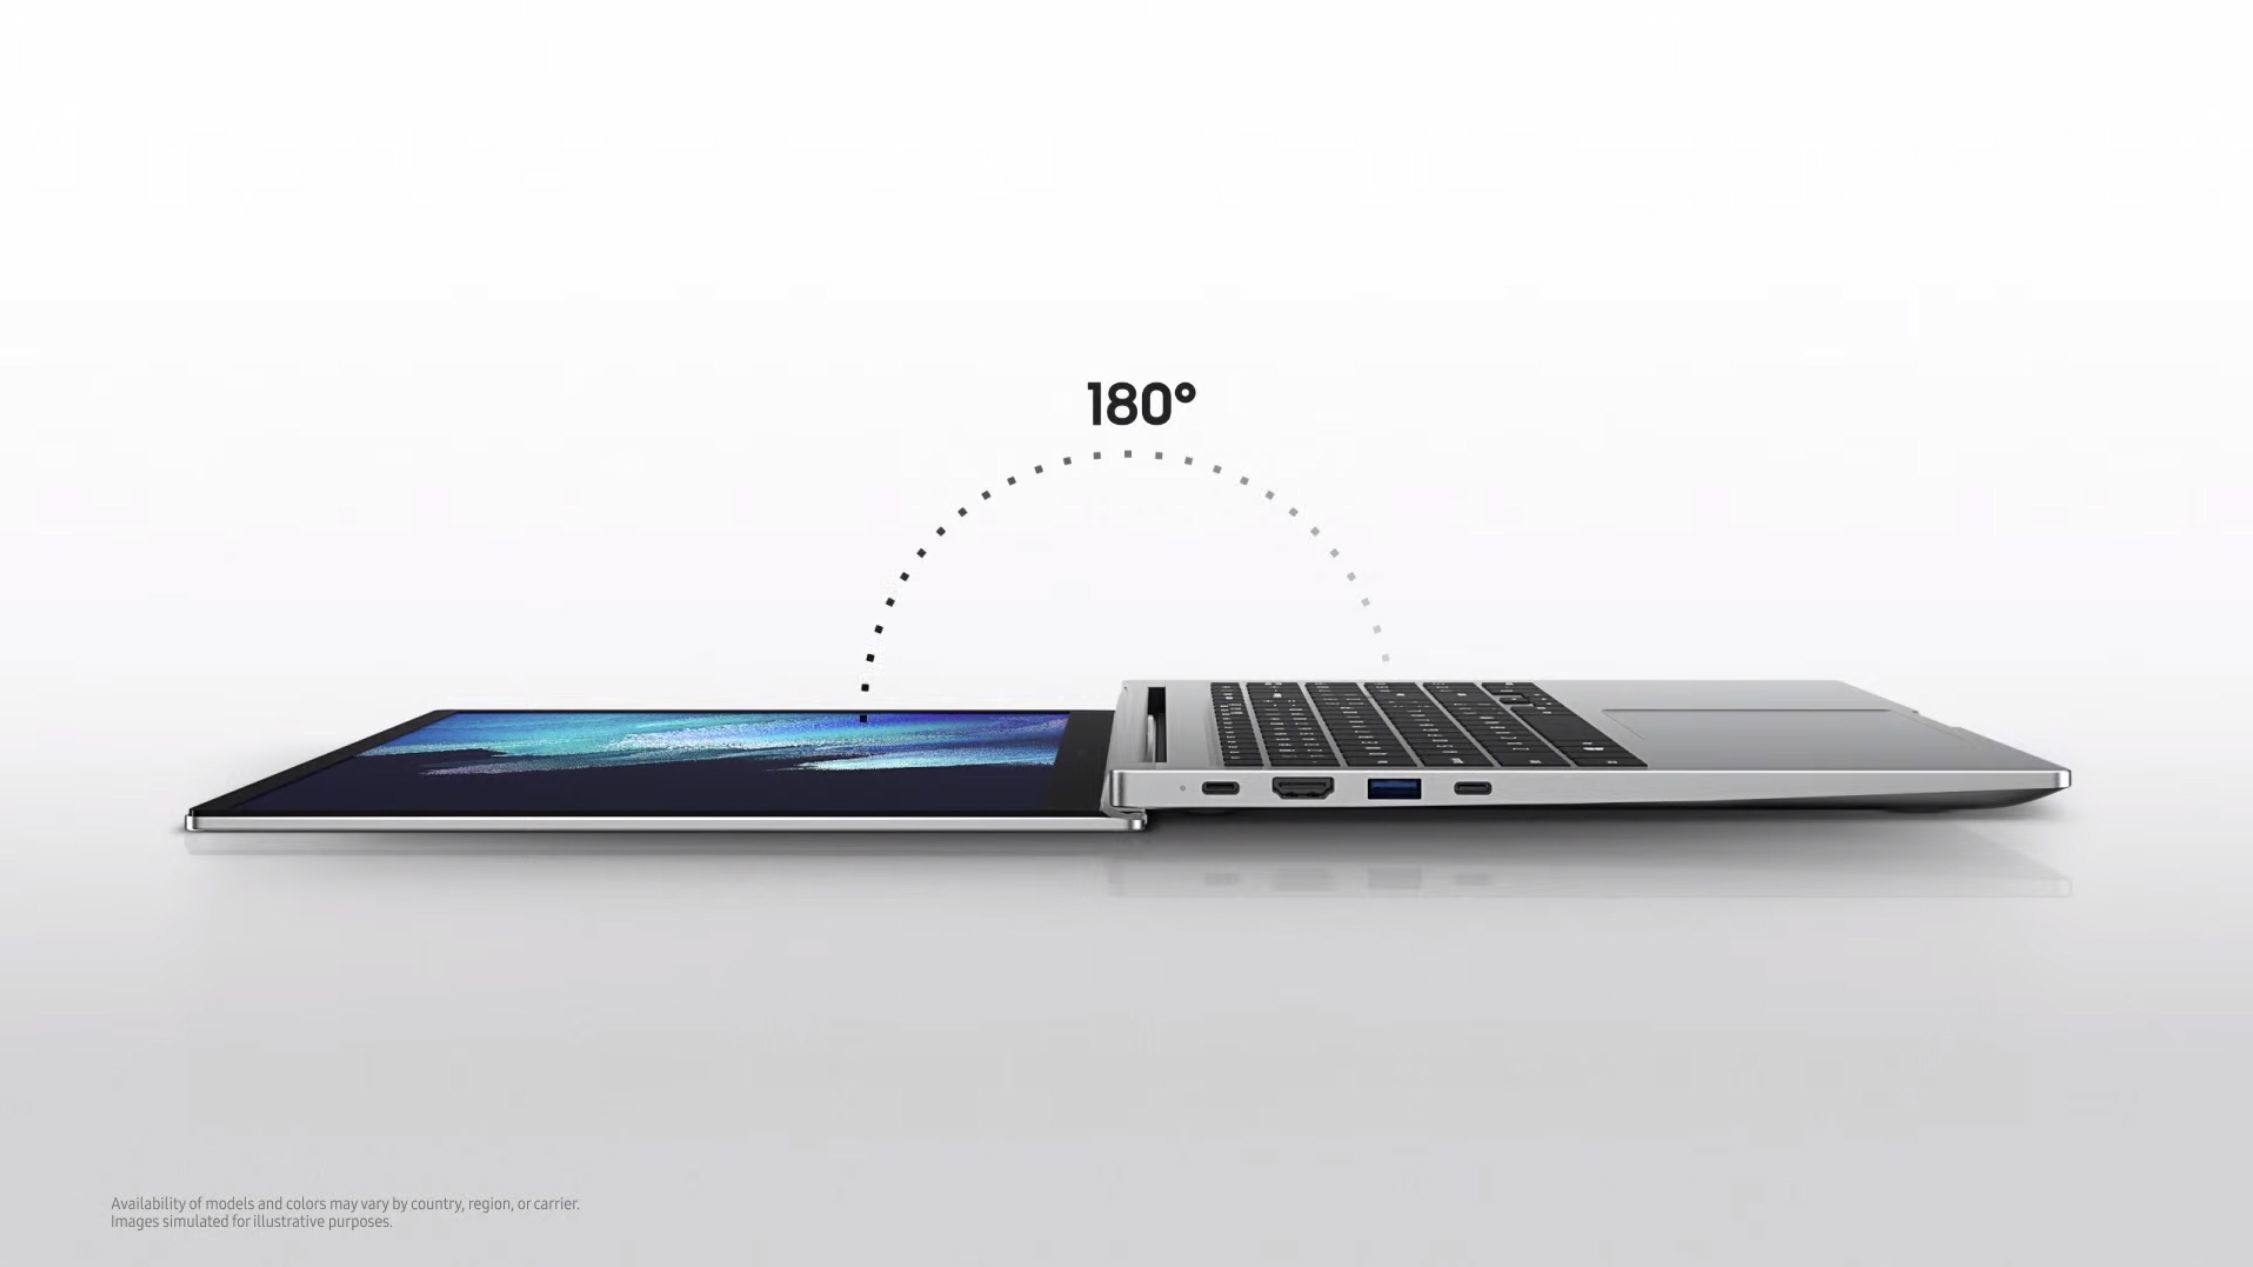 Samsung Galaxy Pro laptops are 'mobile-first